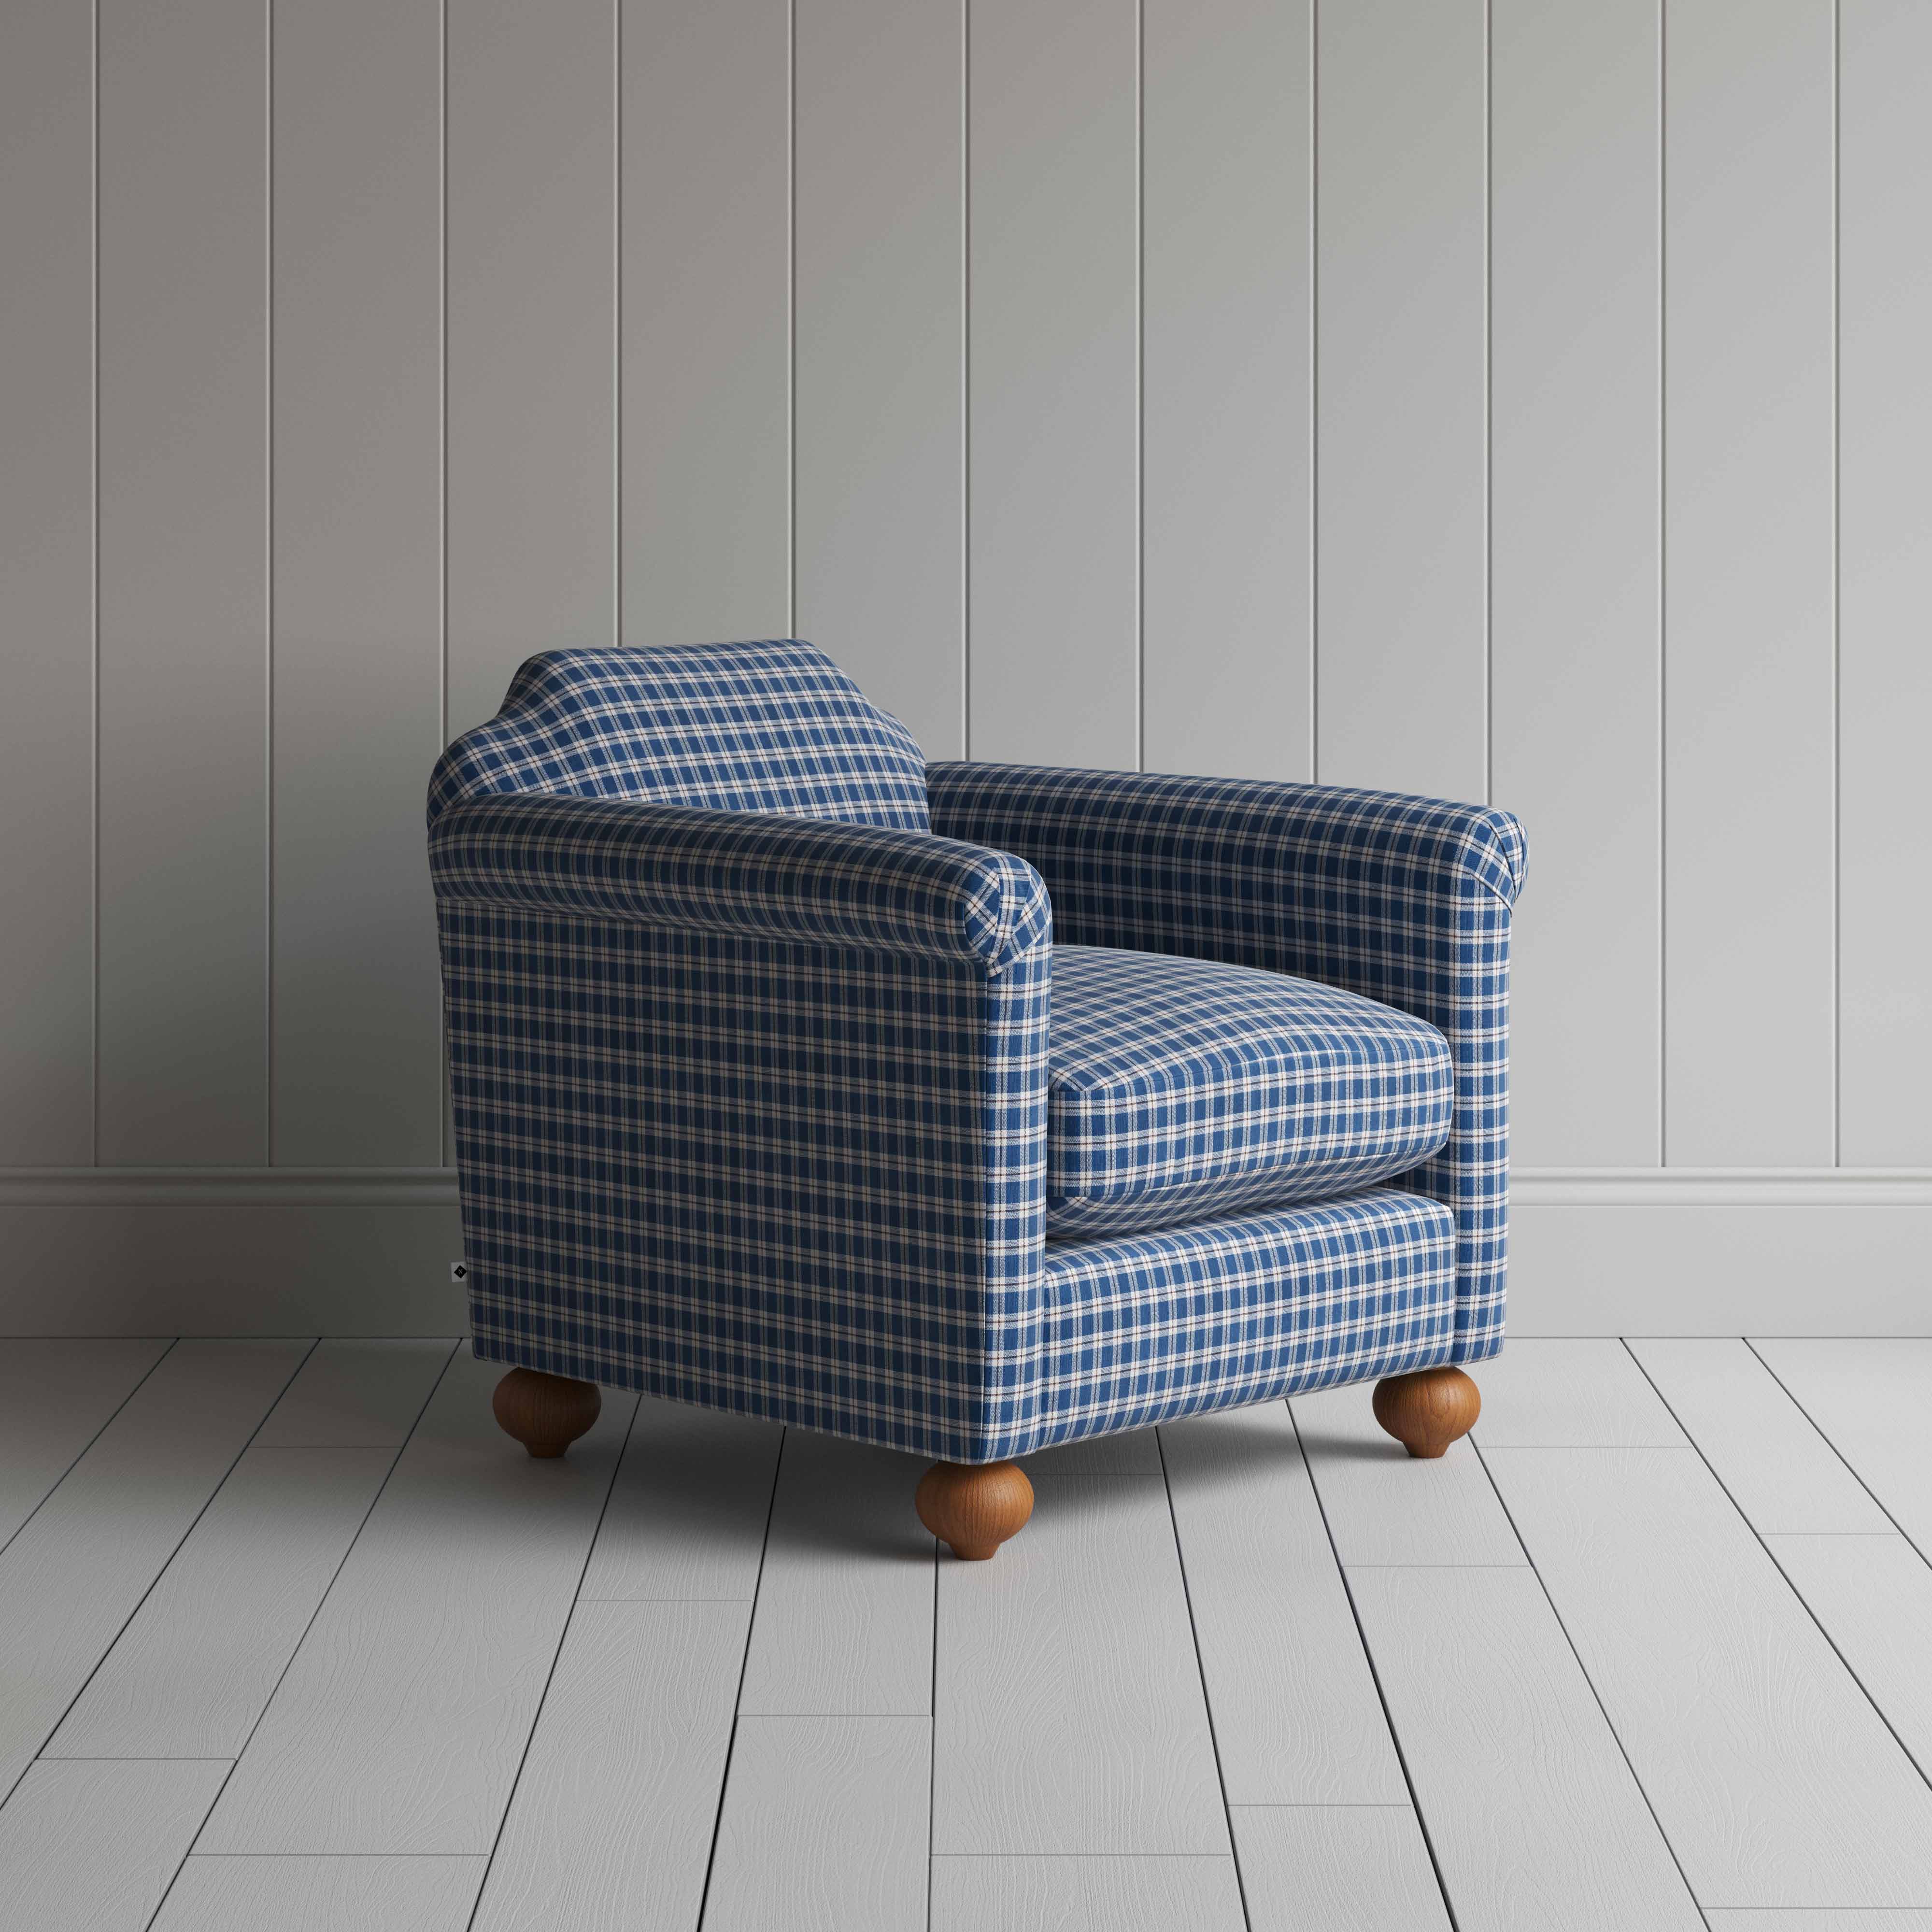  Dolittle Armchair in Well Plaid Cotton, Blue Brown 